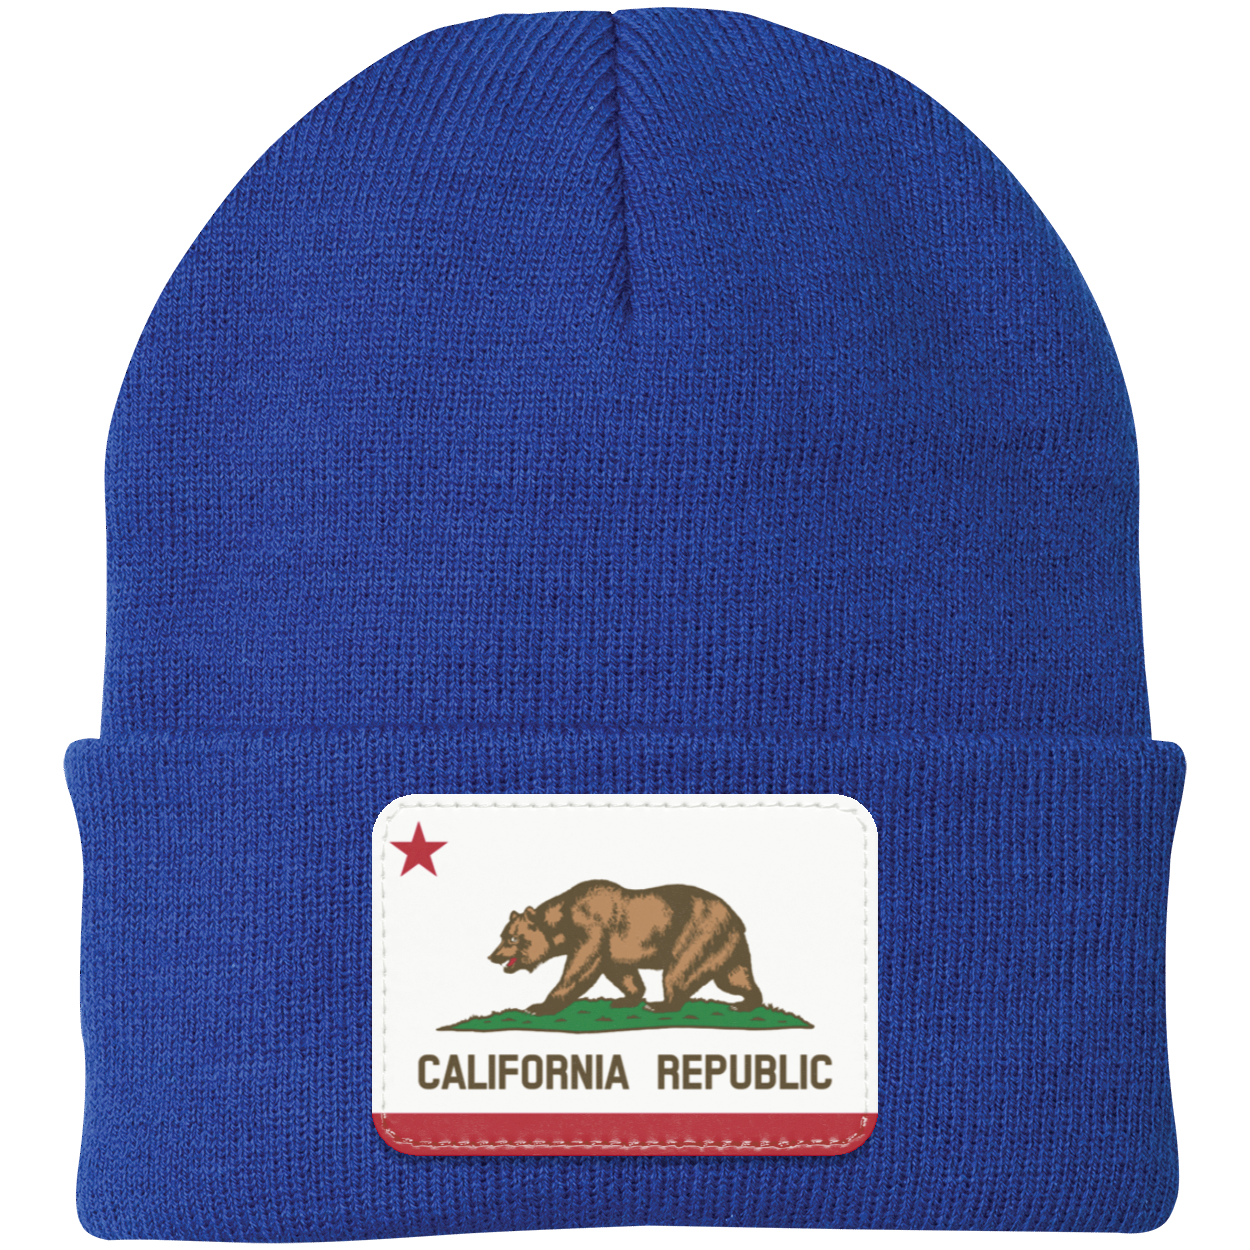 California State Flag - United States of America Knit Cap - Patch